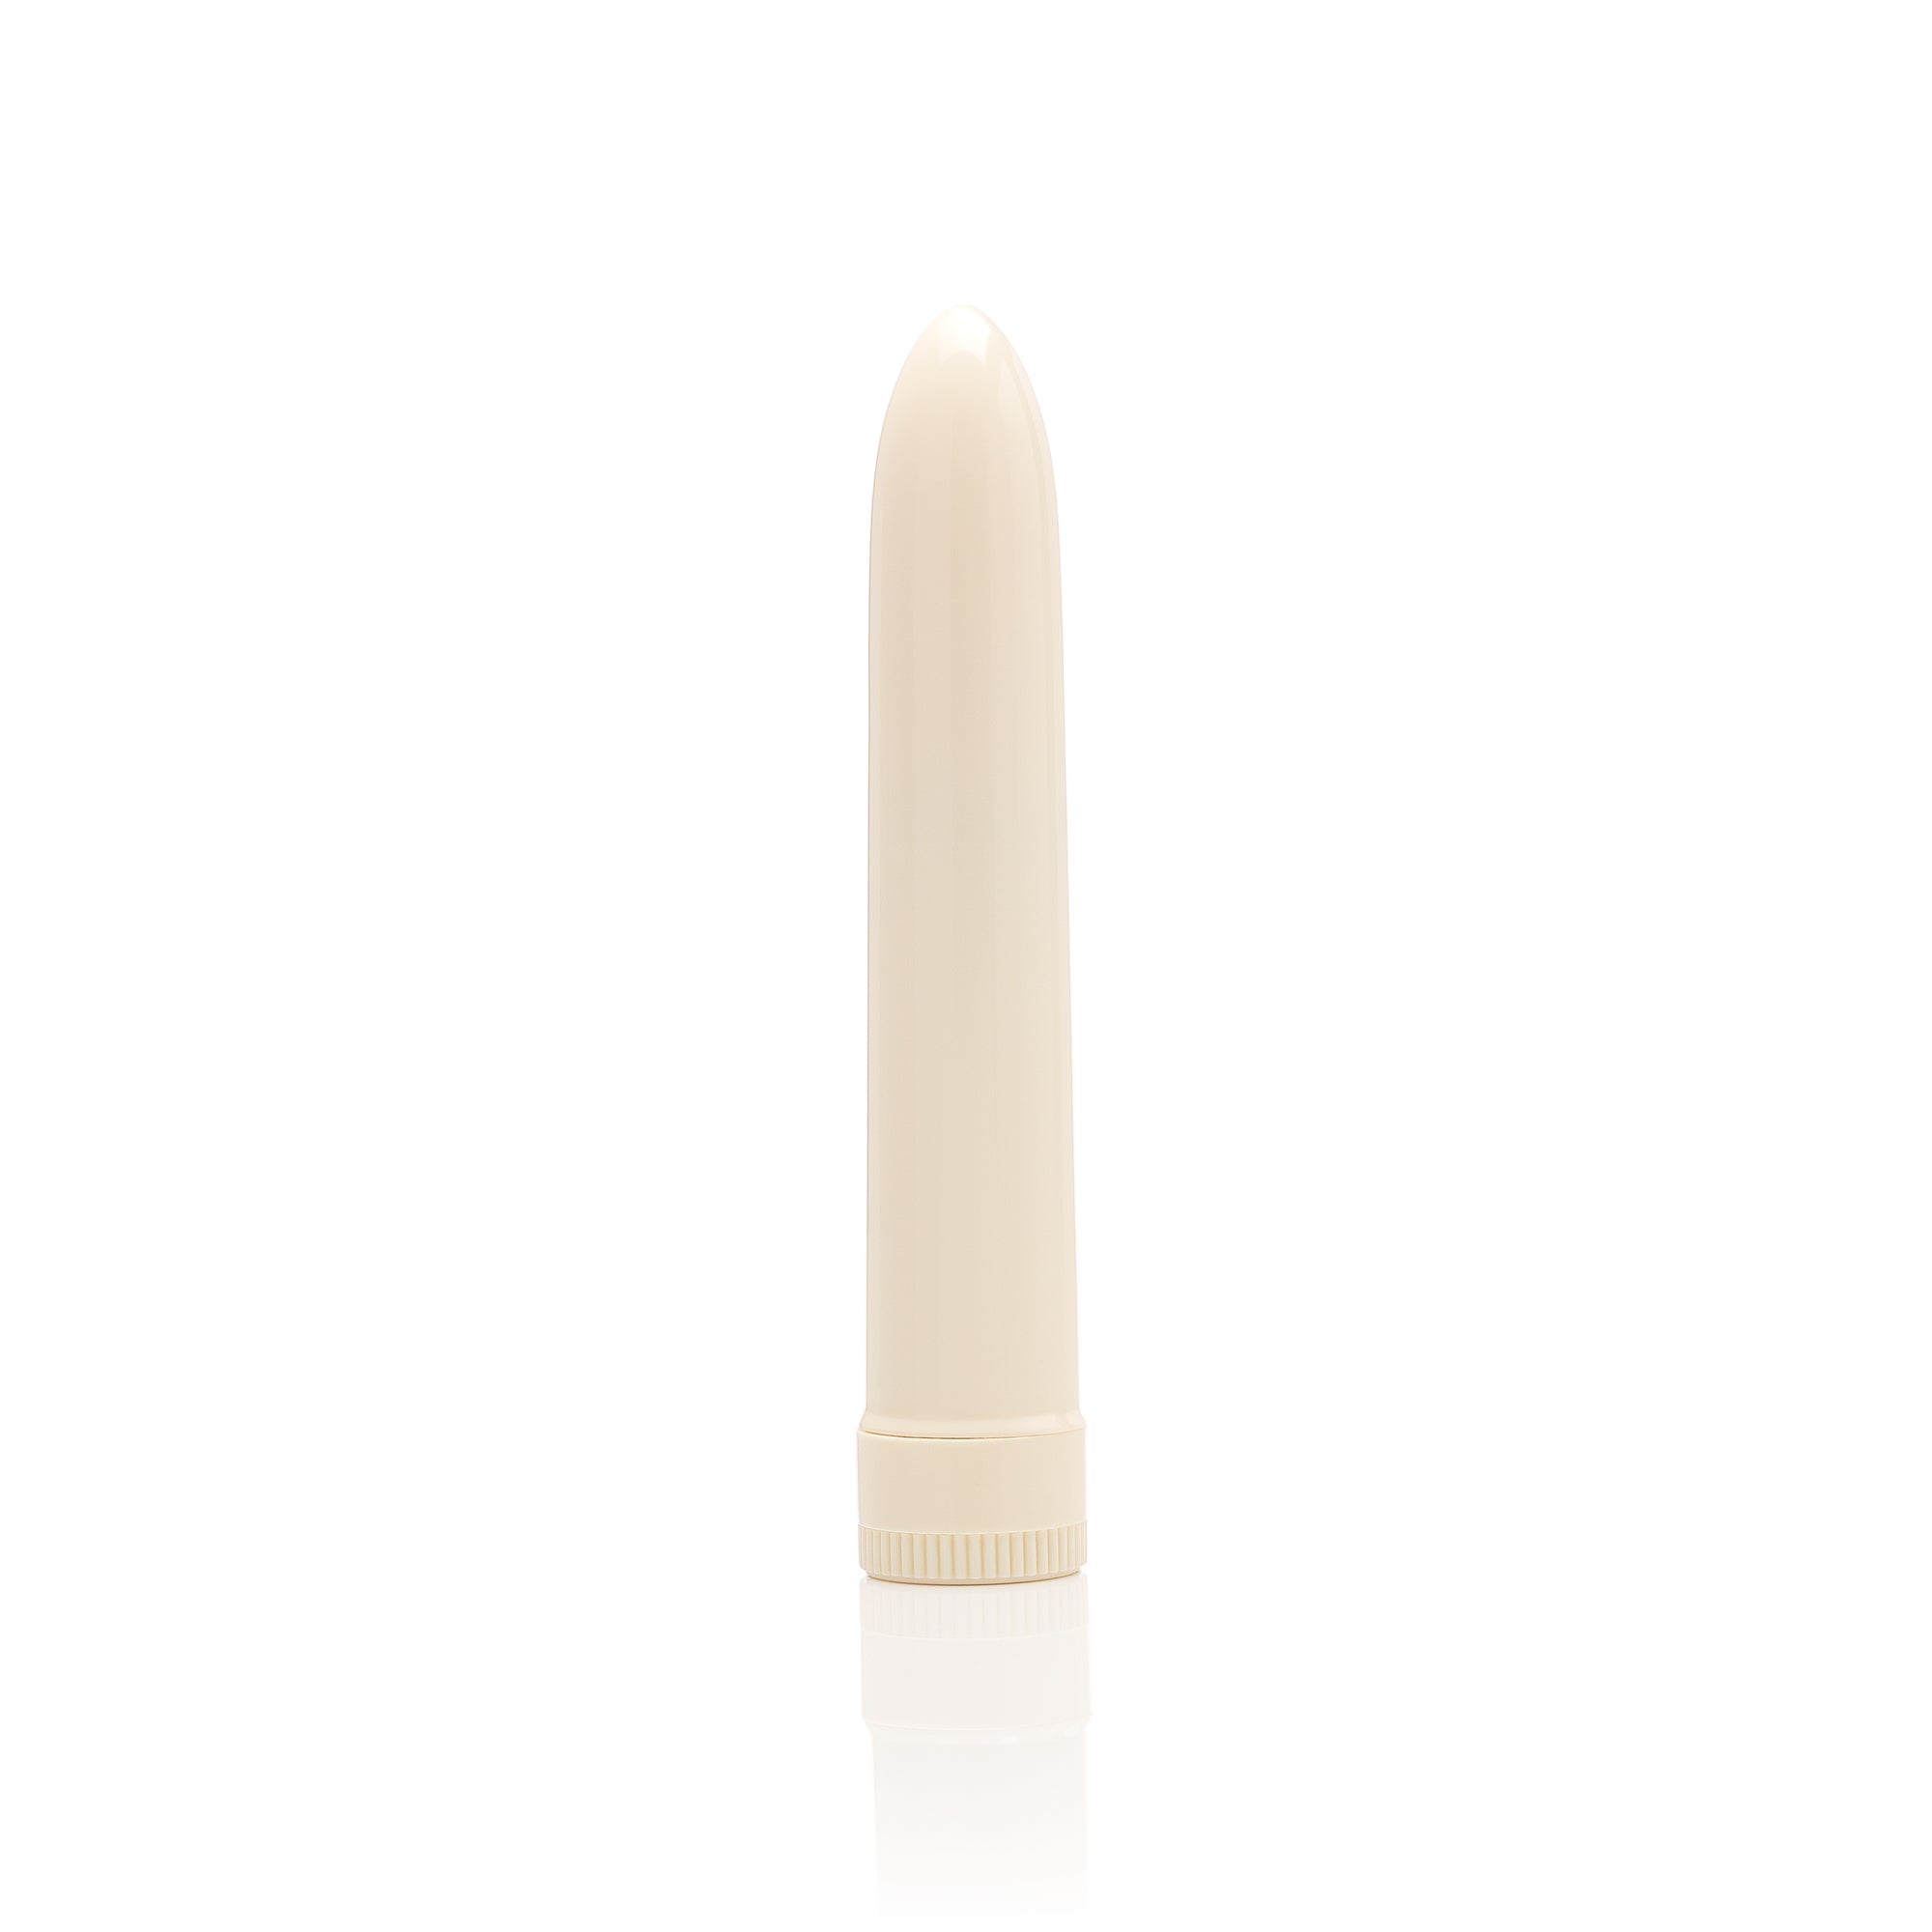  Empire Laboratories Inc. 73733: Clone-A-Willy Refill Light Skin  Silicone : Health & Household